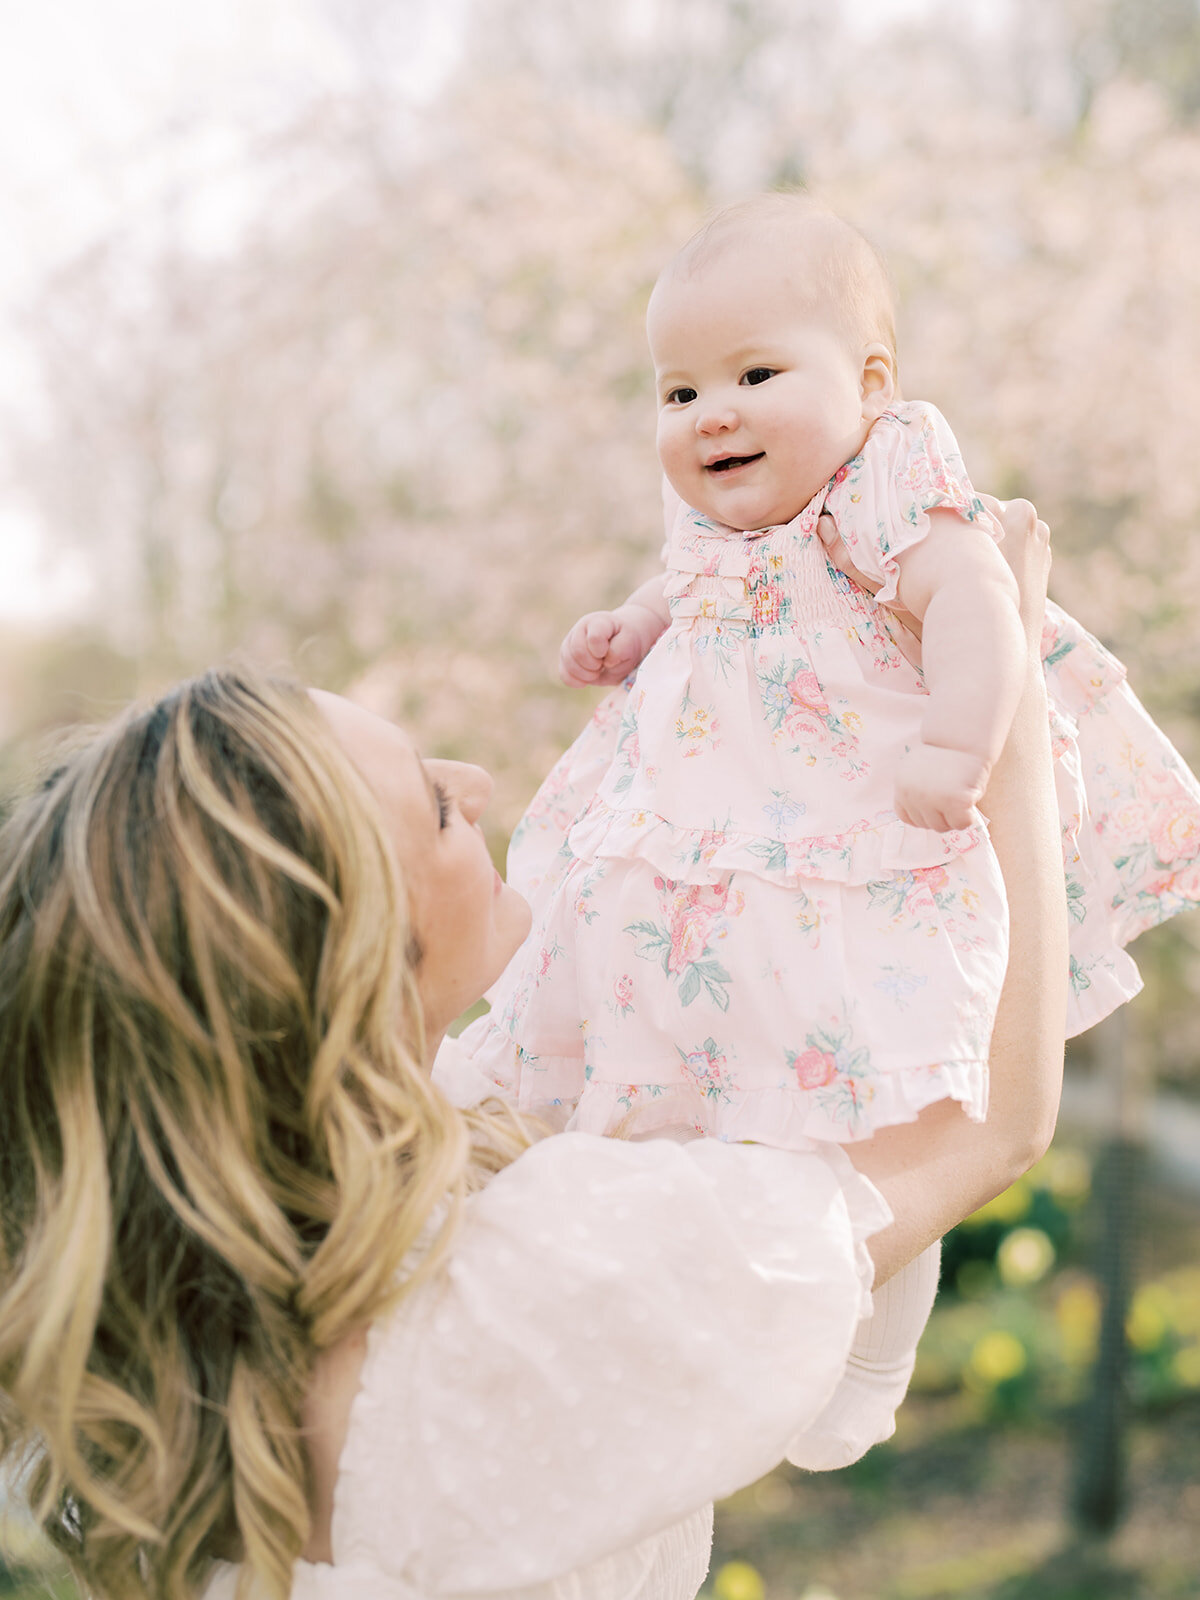 Blonde mother holds baby girl up in the air near cherry blossom tree.